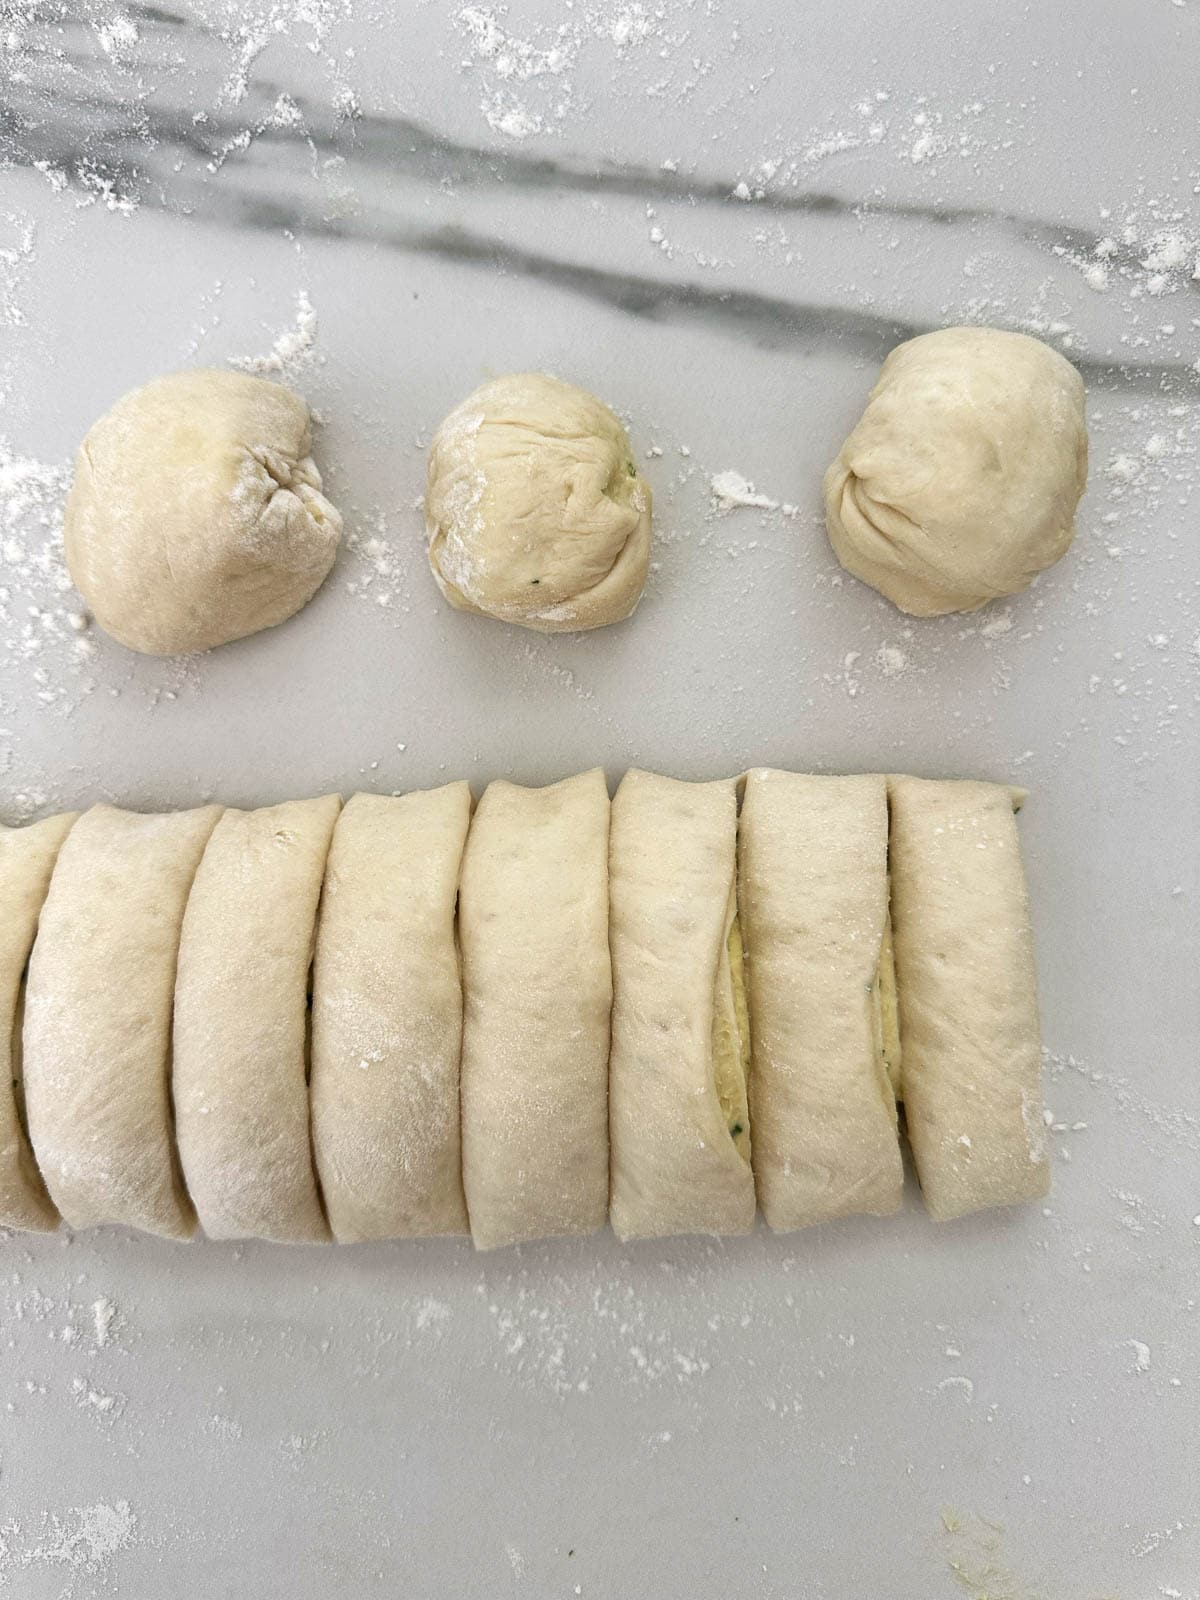 Thermomix garlic bread dough cut into equal portions. 